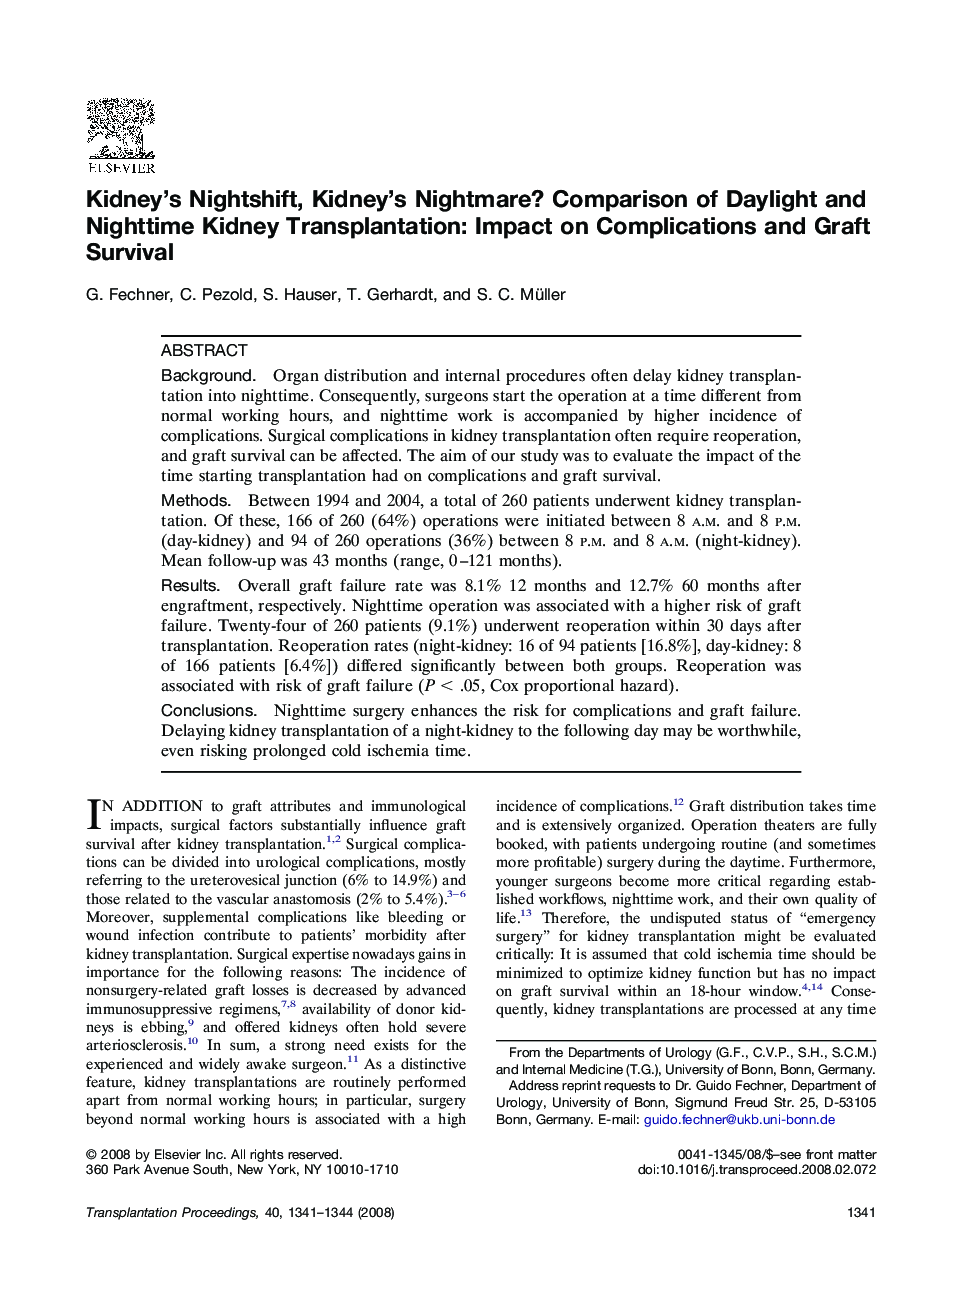 Kidney's Nightshift, Kidney's Nightmare? Comparison of Daylight and Nighttime Kidney Transplantation: Impact on Complications and Graft Survival